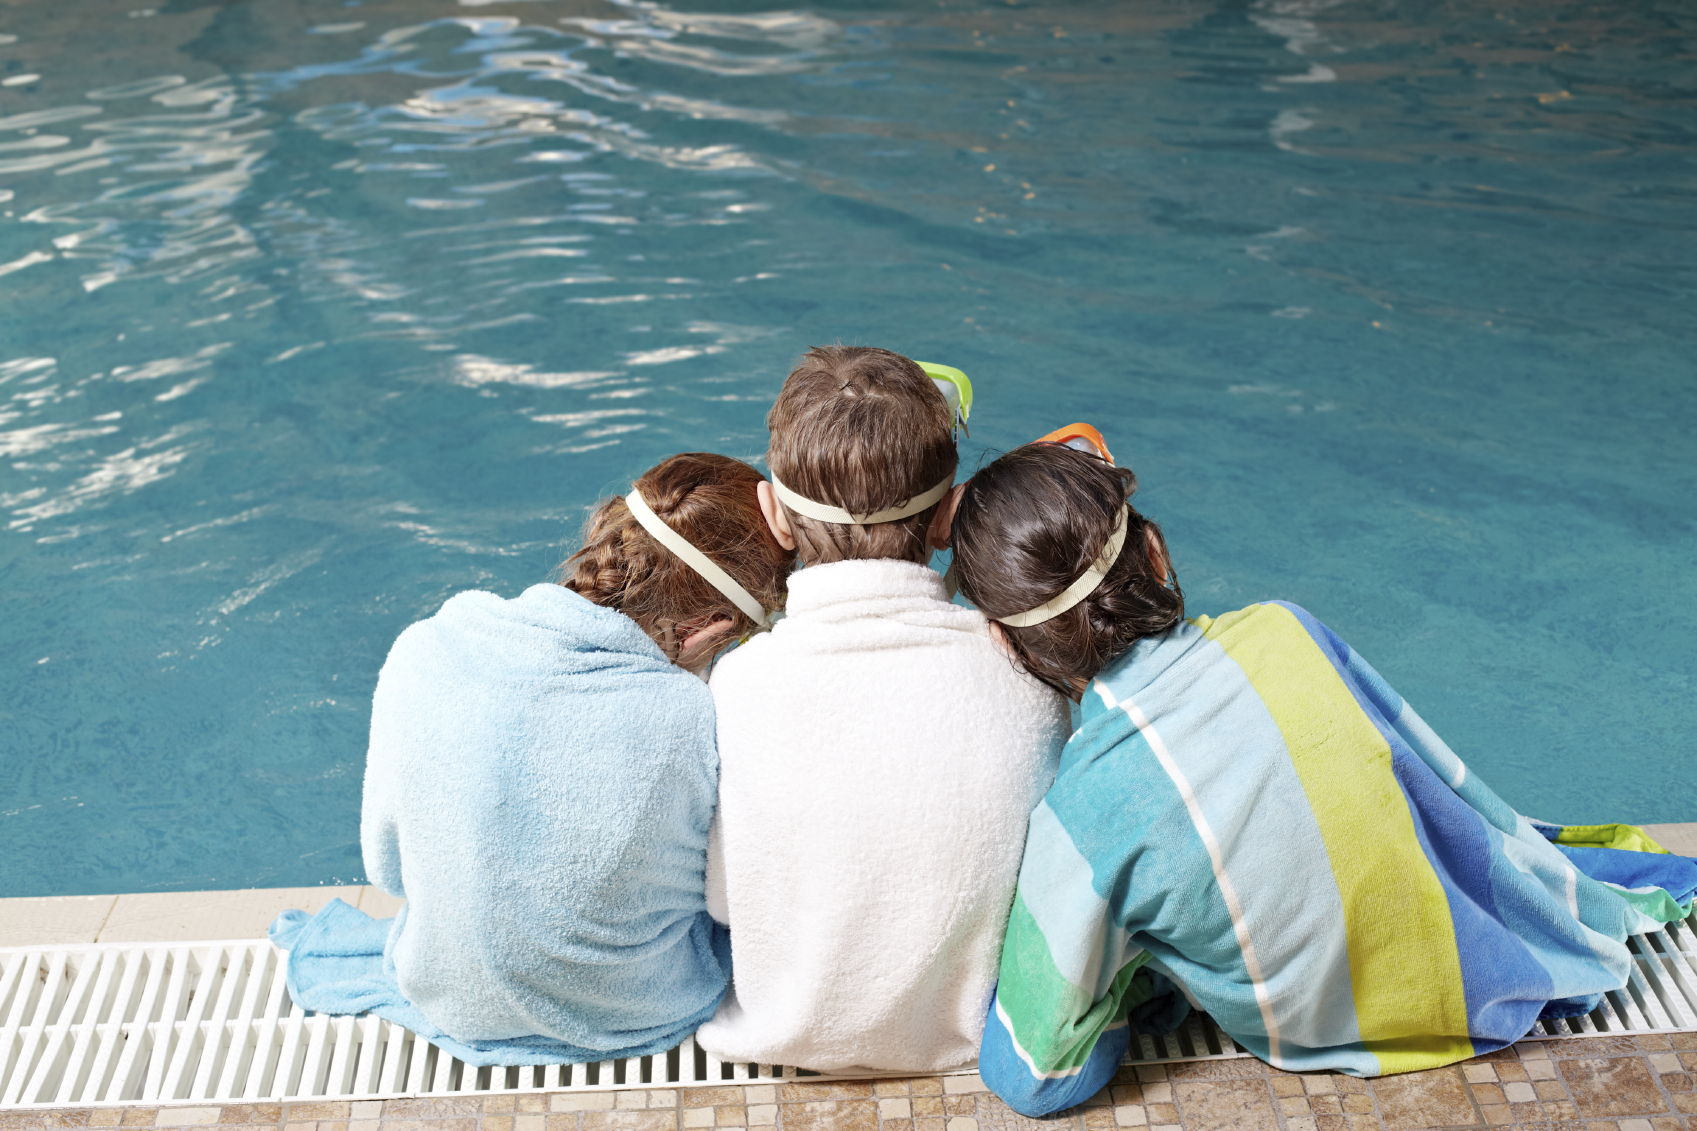 preventing drowning and secondary drowning at the swimming pool